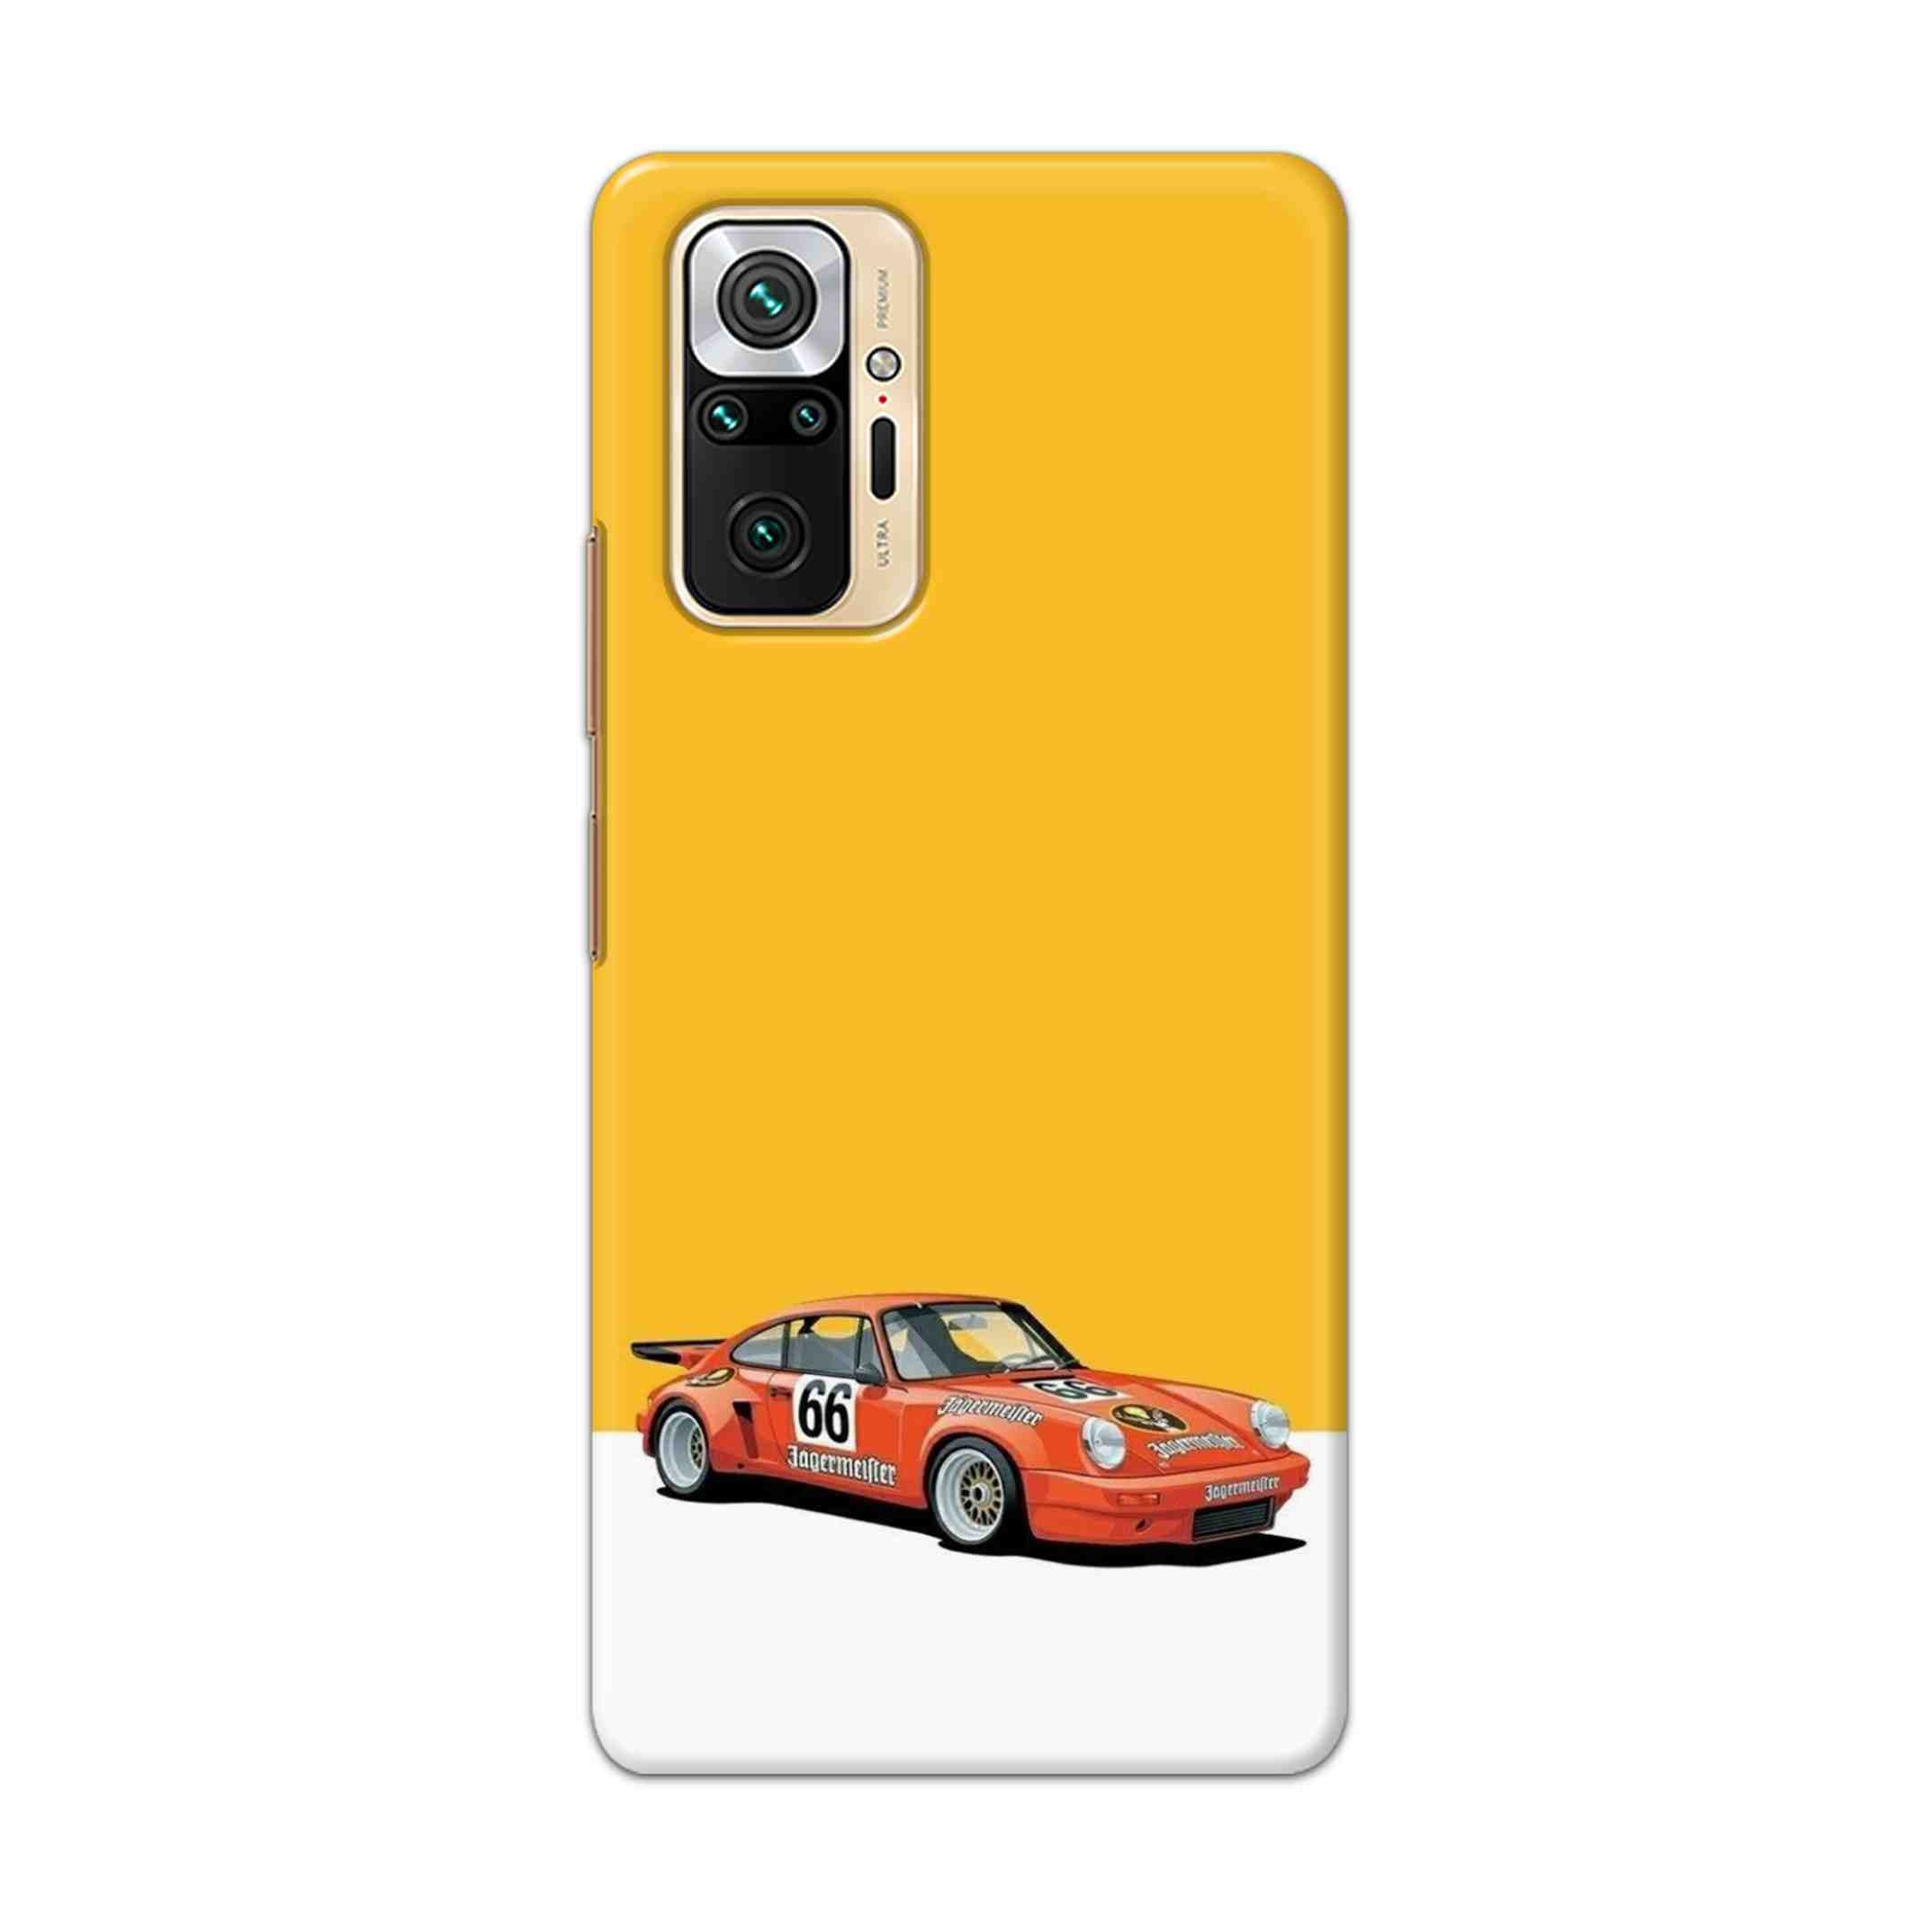 Buy Porche Hard Back Mobile Phone Case Cover For Redmi Note 10 Pro Online